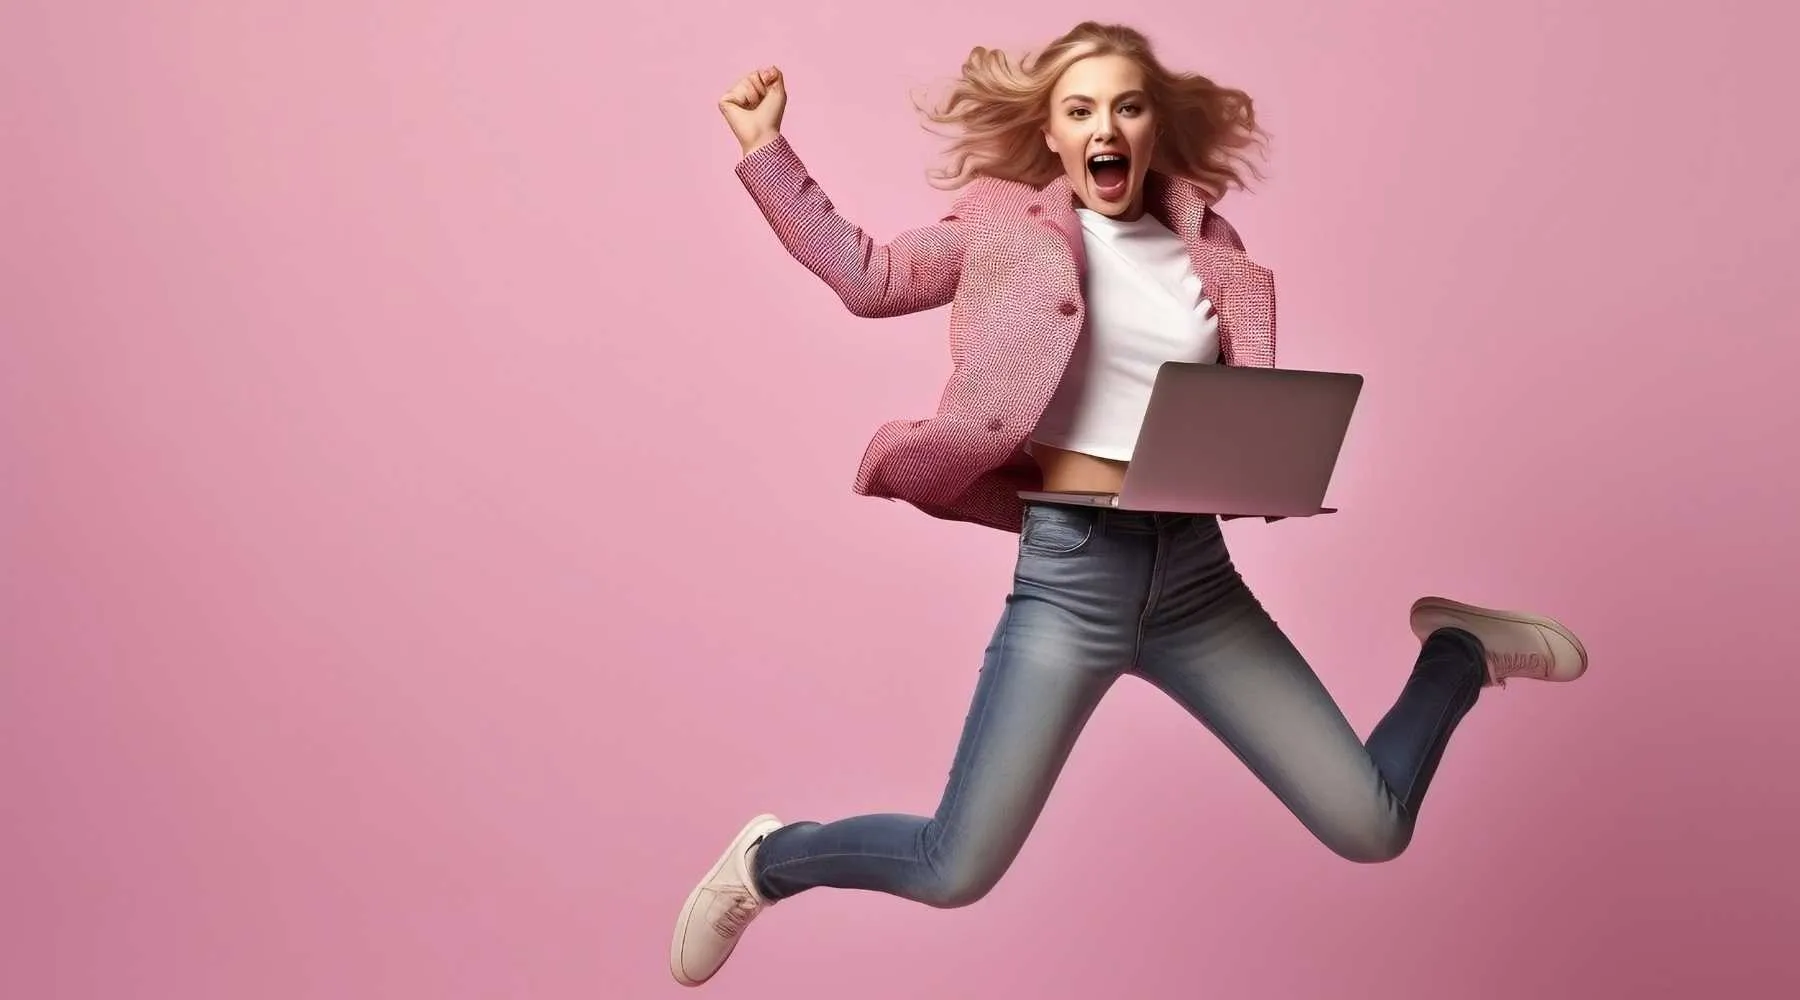 A woman jumping with a laptop in her hand